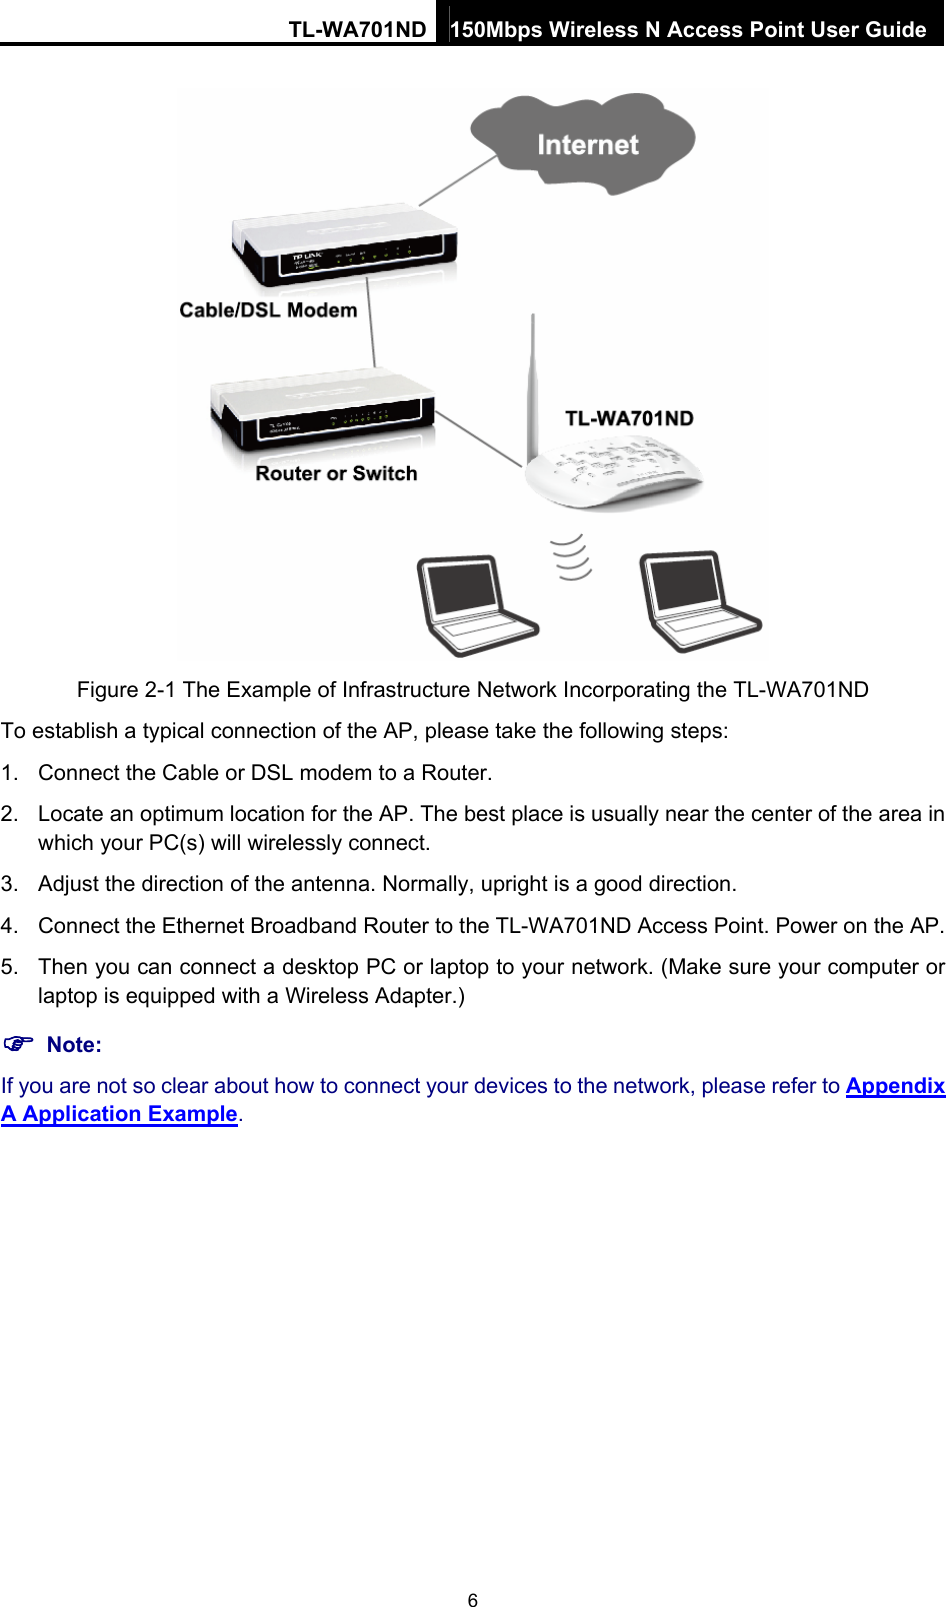 TL-WA701ND 150Mbps Wireless N Access Point User Guide  Figure 2-1 The Example of Infrastructure Network Incorporating the TL-WA701ND To establish a typical connection of the AP, please take the following steps: 1.  Connect the Cable or DSL modem to a Router. 2.  Locate an optimum location for the AP. The best place is usually near the center of the area in which your PC(s) will wirelessly connect. 3.  Adjust the direction of the antenna. Normally, upright is a good direction. 4.  Connect the Ethernet Broadband Router to the TL-WA701ND Access Point. Power on the AP. 5.  Then you can connect a desktop PC or laptop to your network. (Make sure your computer or laptop is equipped with a Wireless Adapter.) ) Note: If you are not so clear about how to connect your devices to the network, please refer to Appendix A Application Example.  6 